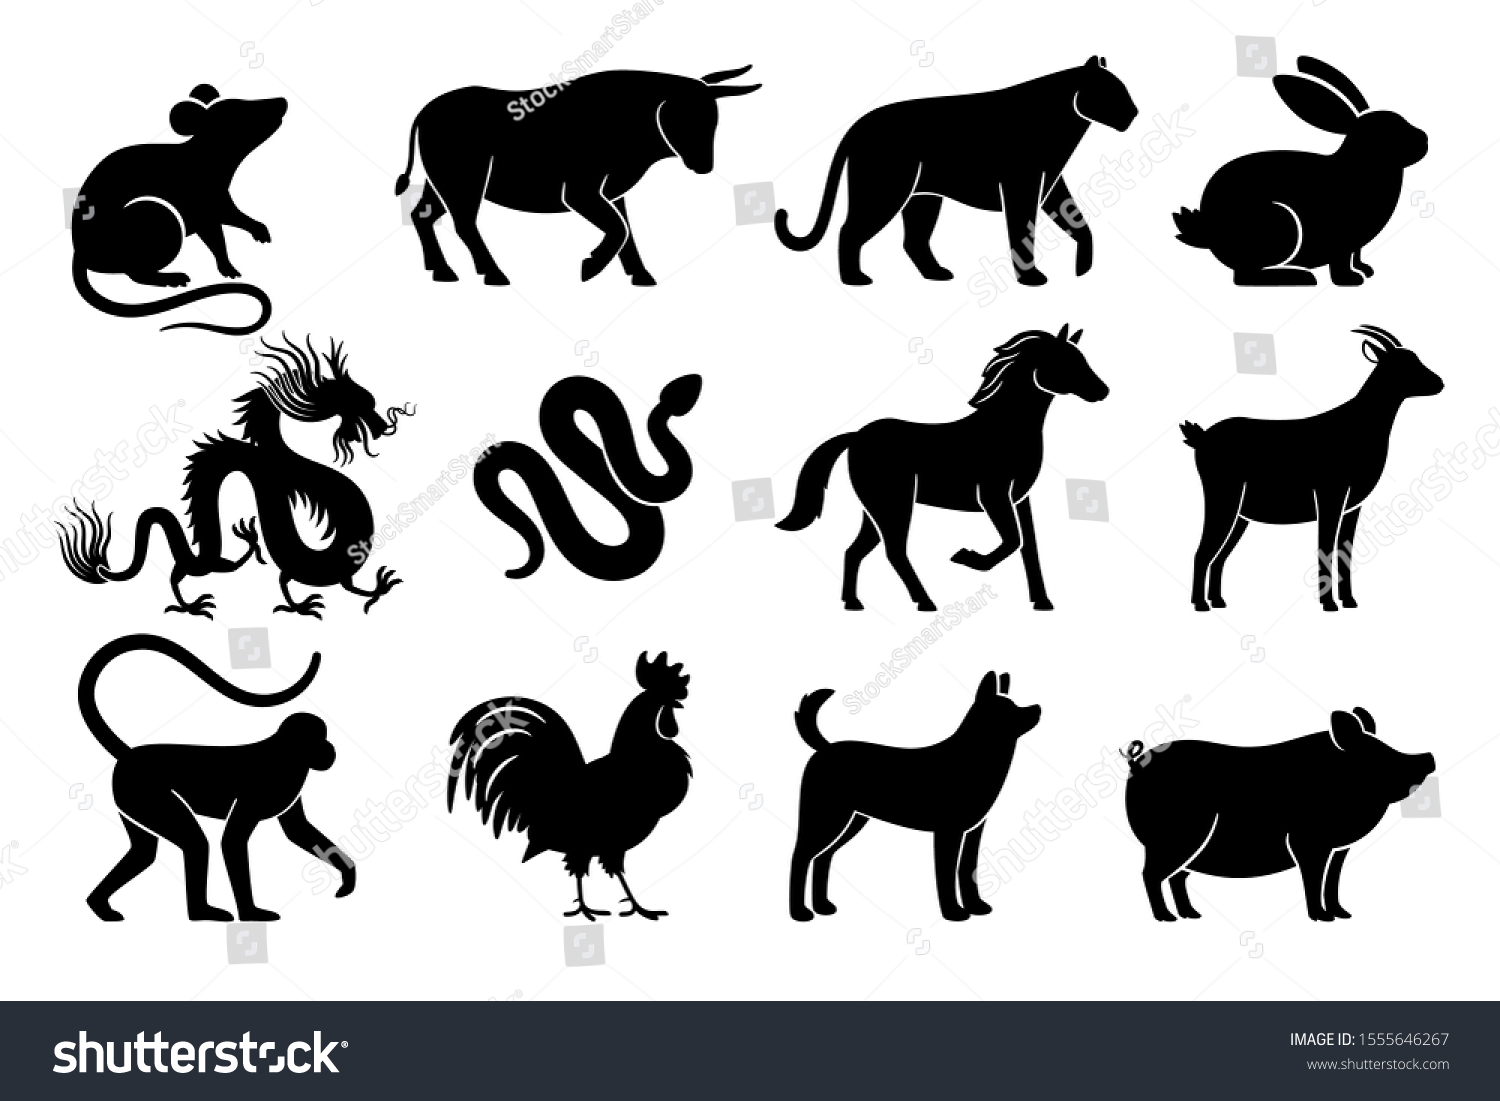 Chinese horoscope silhouettes. Chinese zodiac animals symbols of year, black signs on white background, tiger and rabbit, bull and dragon mythology drawings #1555646267